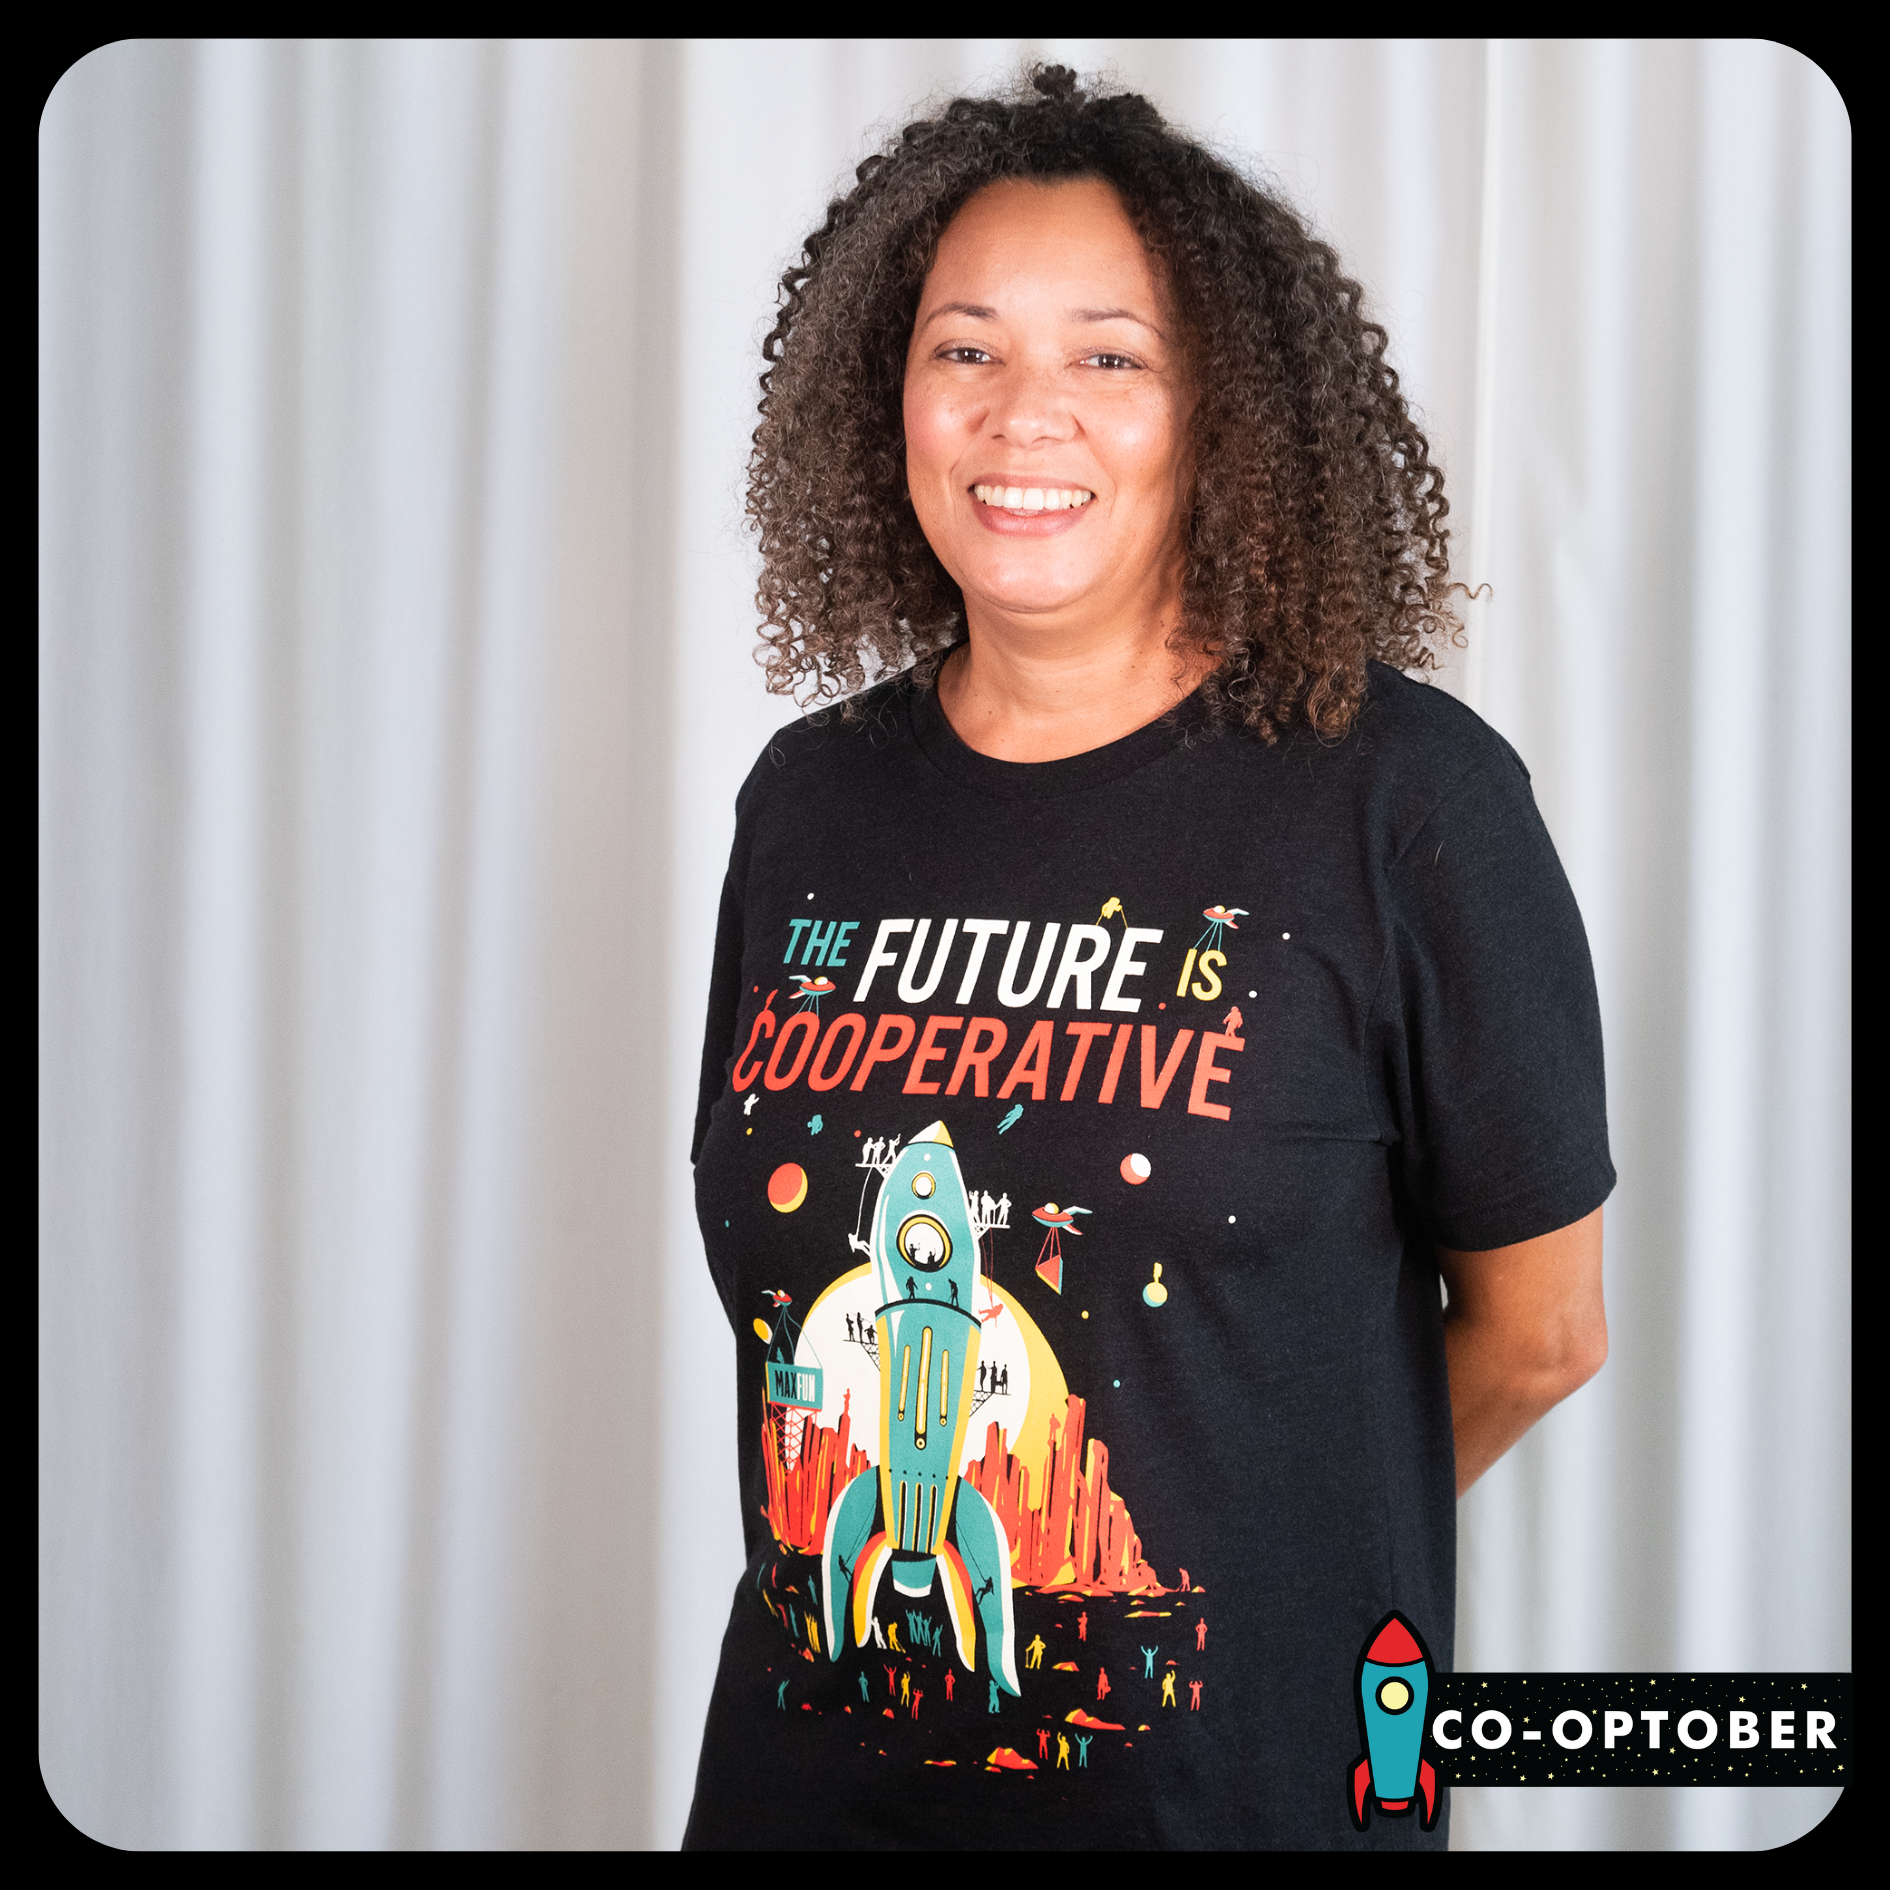 Laura Swisher wearing a black T-shirt that says The Future is Cooperative and above an illustration of a rocket being built.